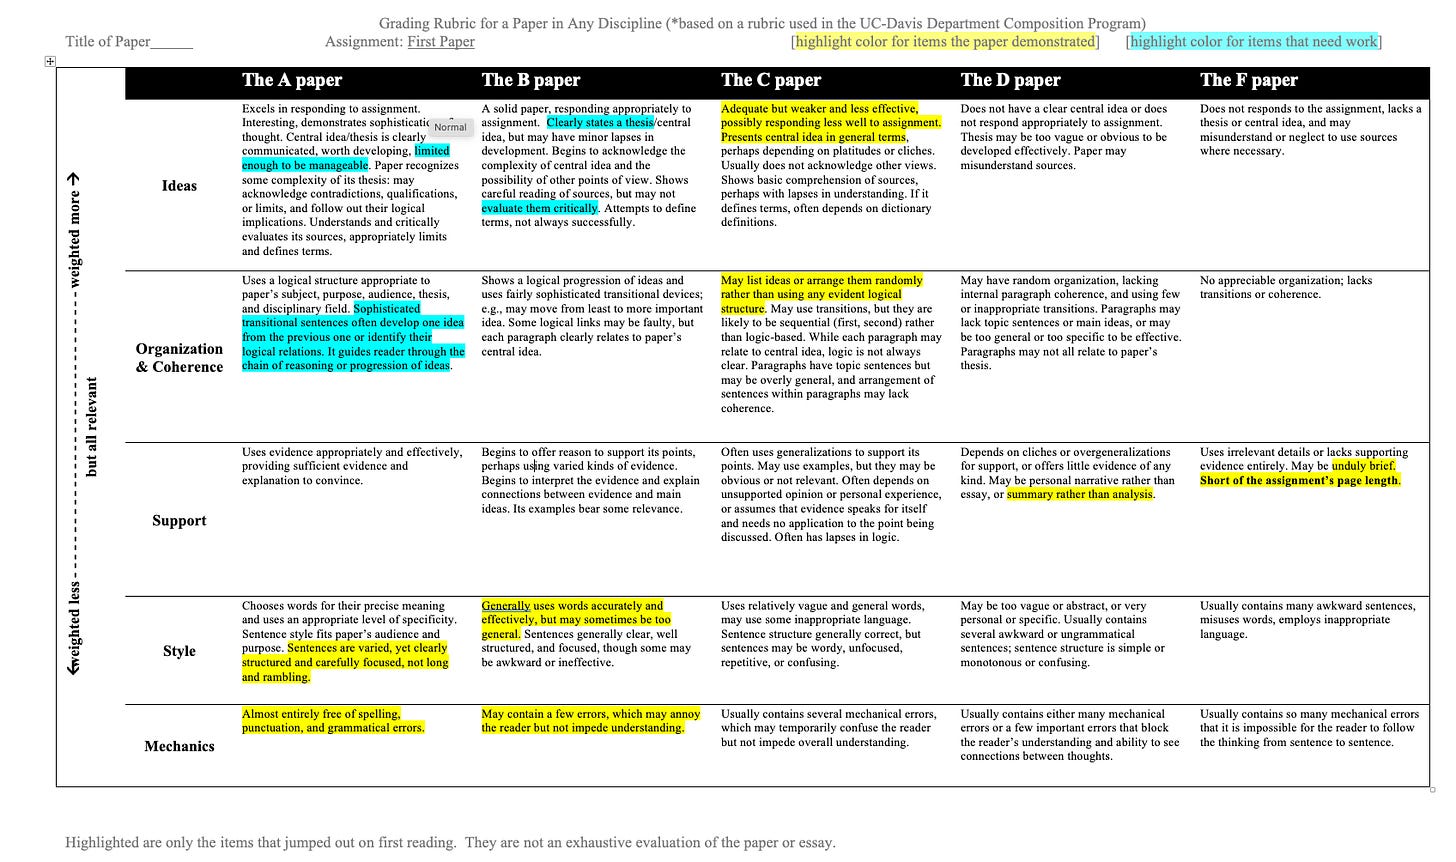 A grading rubric with highlighting of what the paper demonstrated in yellow and what needs work in blue.